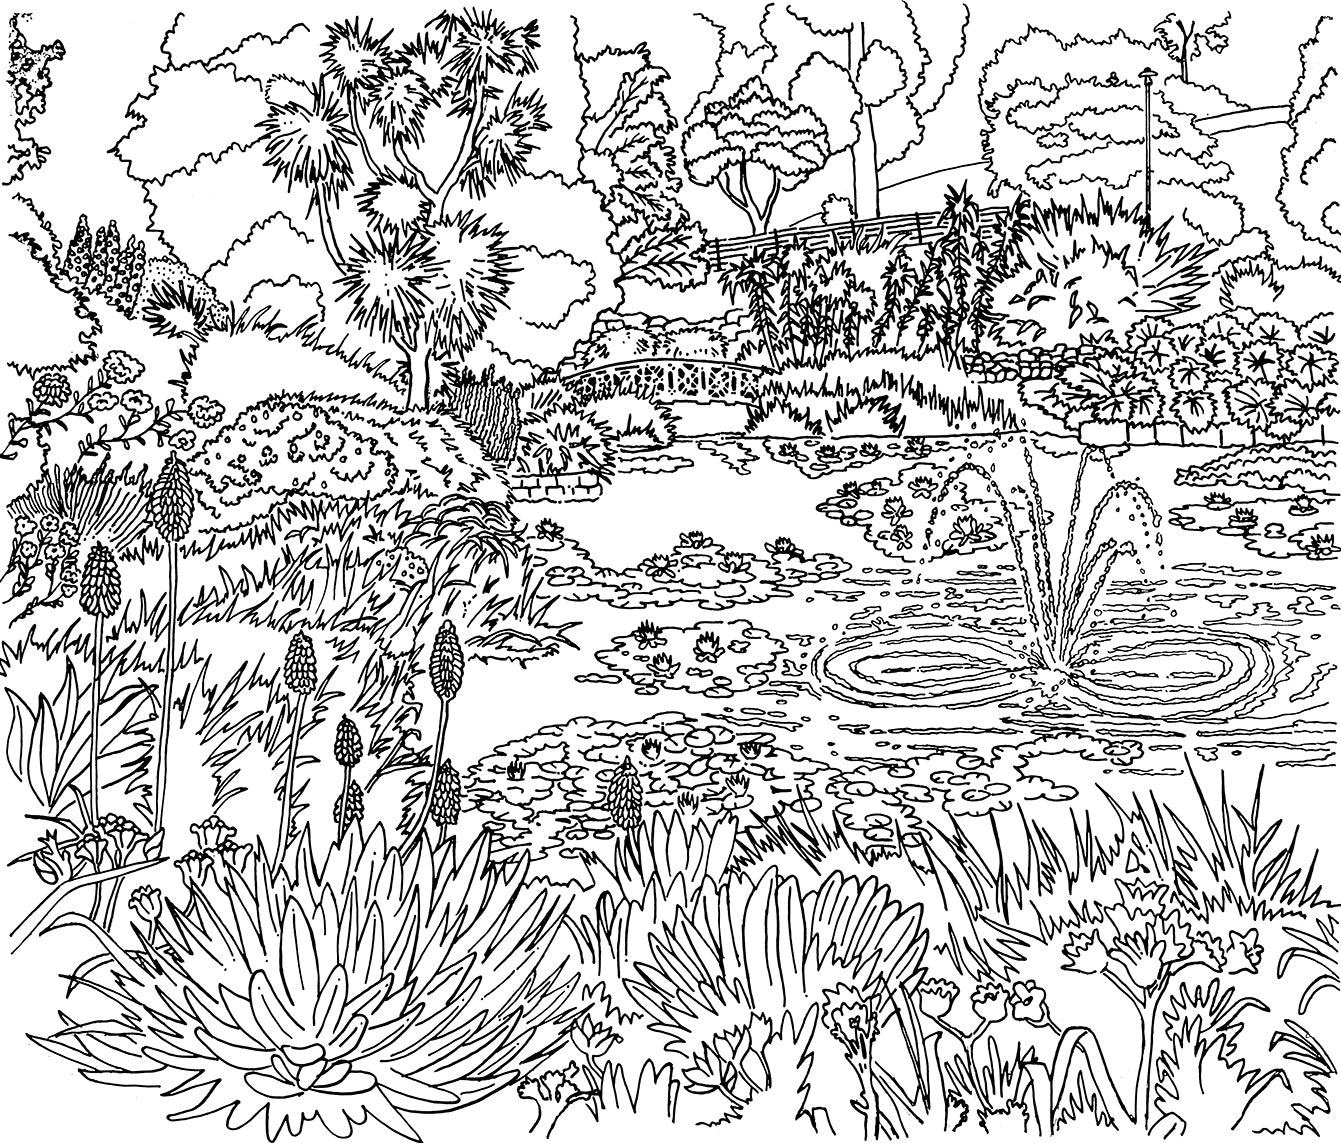 Colour in Hobart, Tasmania's 200-year-old botanical gardens as illustrated by Brady Michaels | The Gents Australia